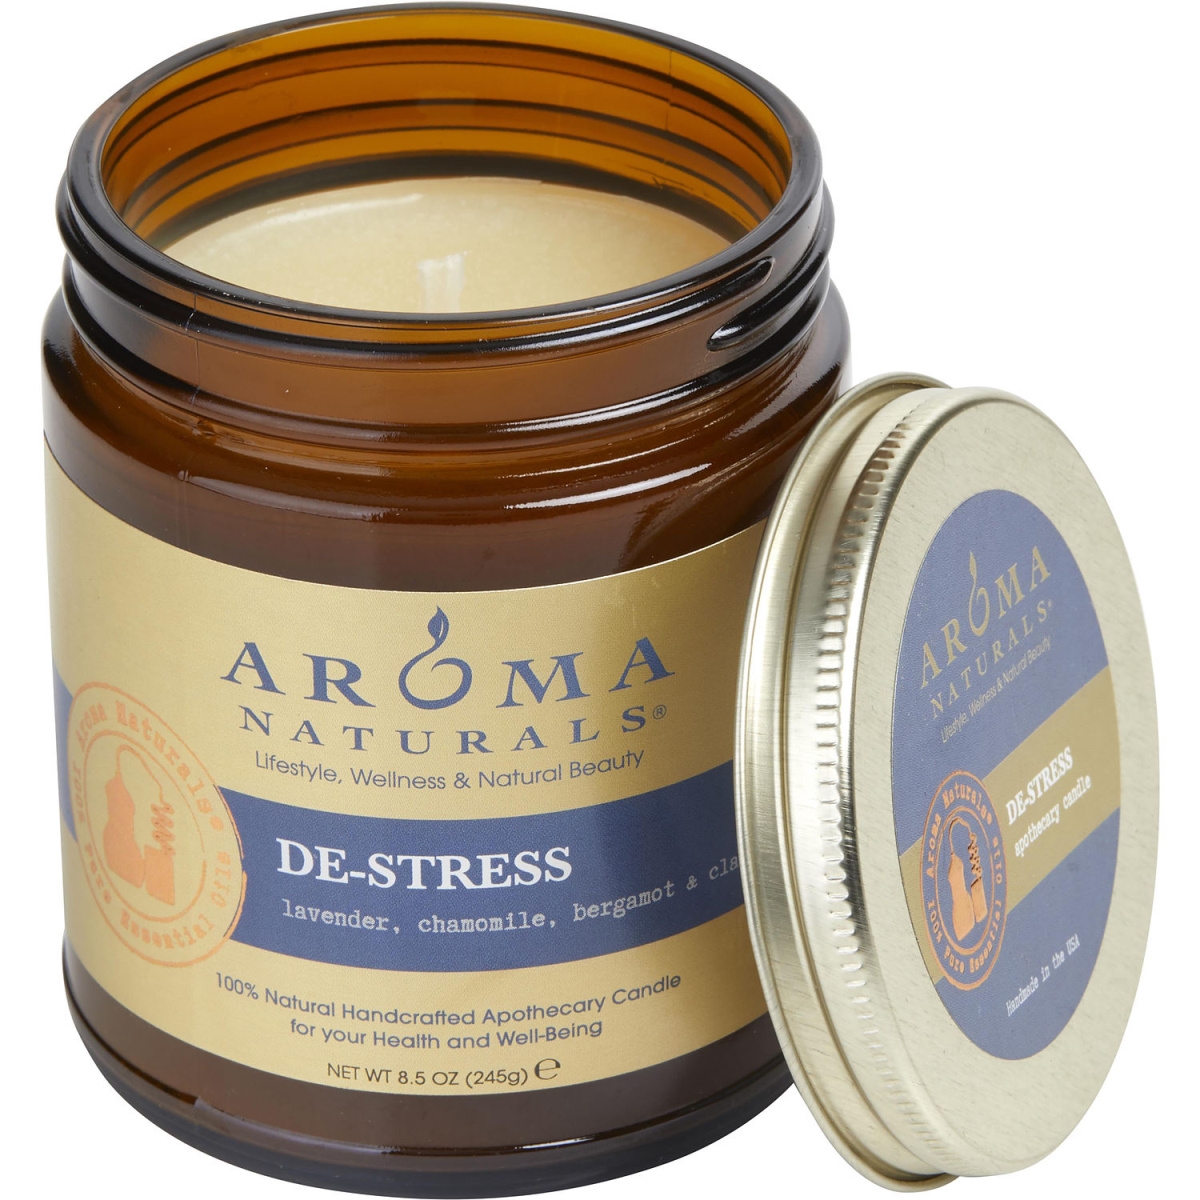 339412 3 X 3 In. Unisex One Jar Aromatherapy Candle